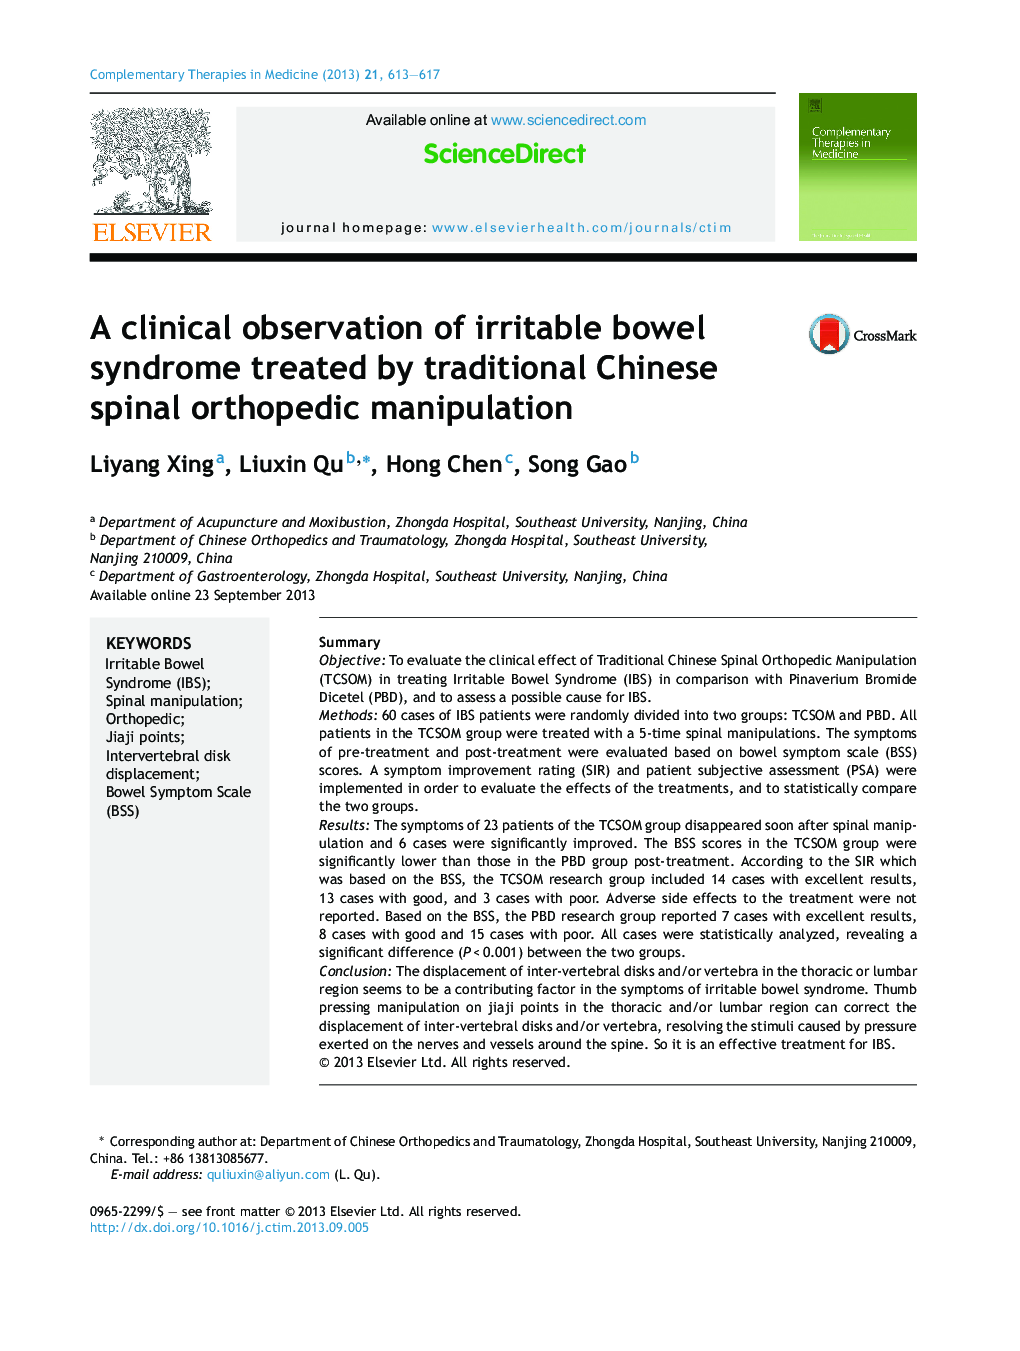 A clinical observation of irritable bowel syndrome treated by traditional Chinese spinal orthopedic manipulation